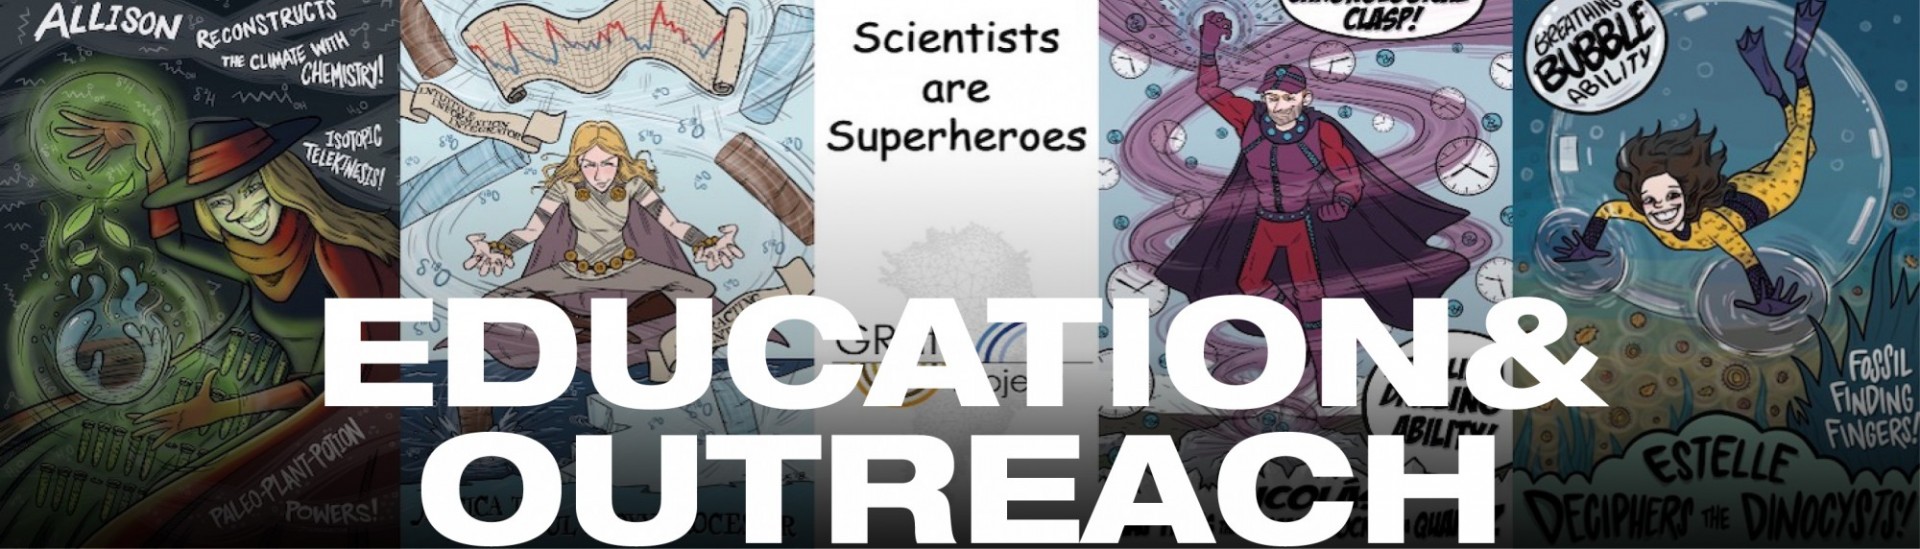 Scientists are Superheroes Cards - Education & Outreach